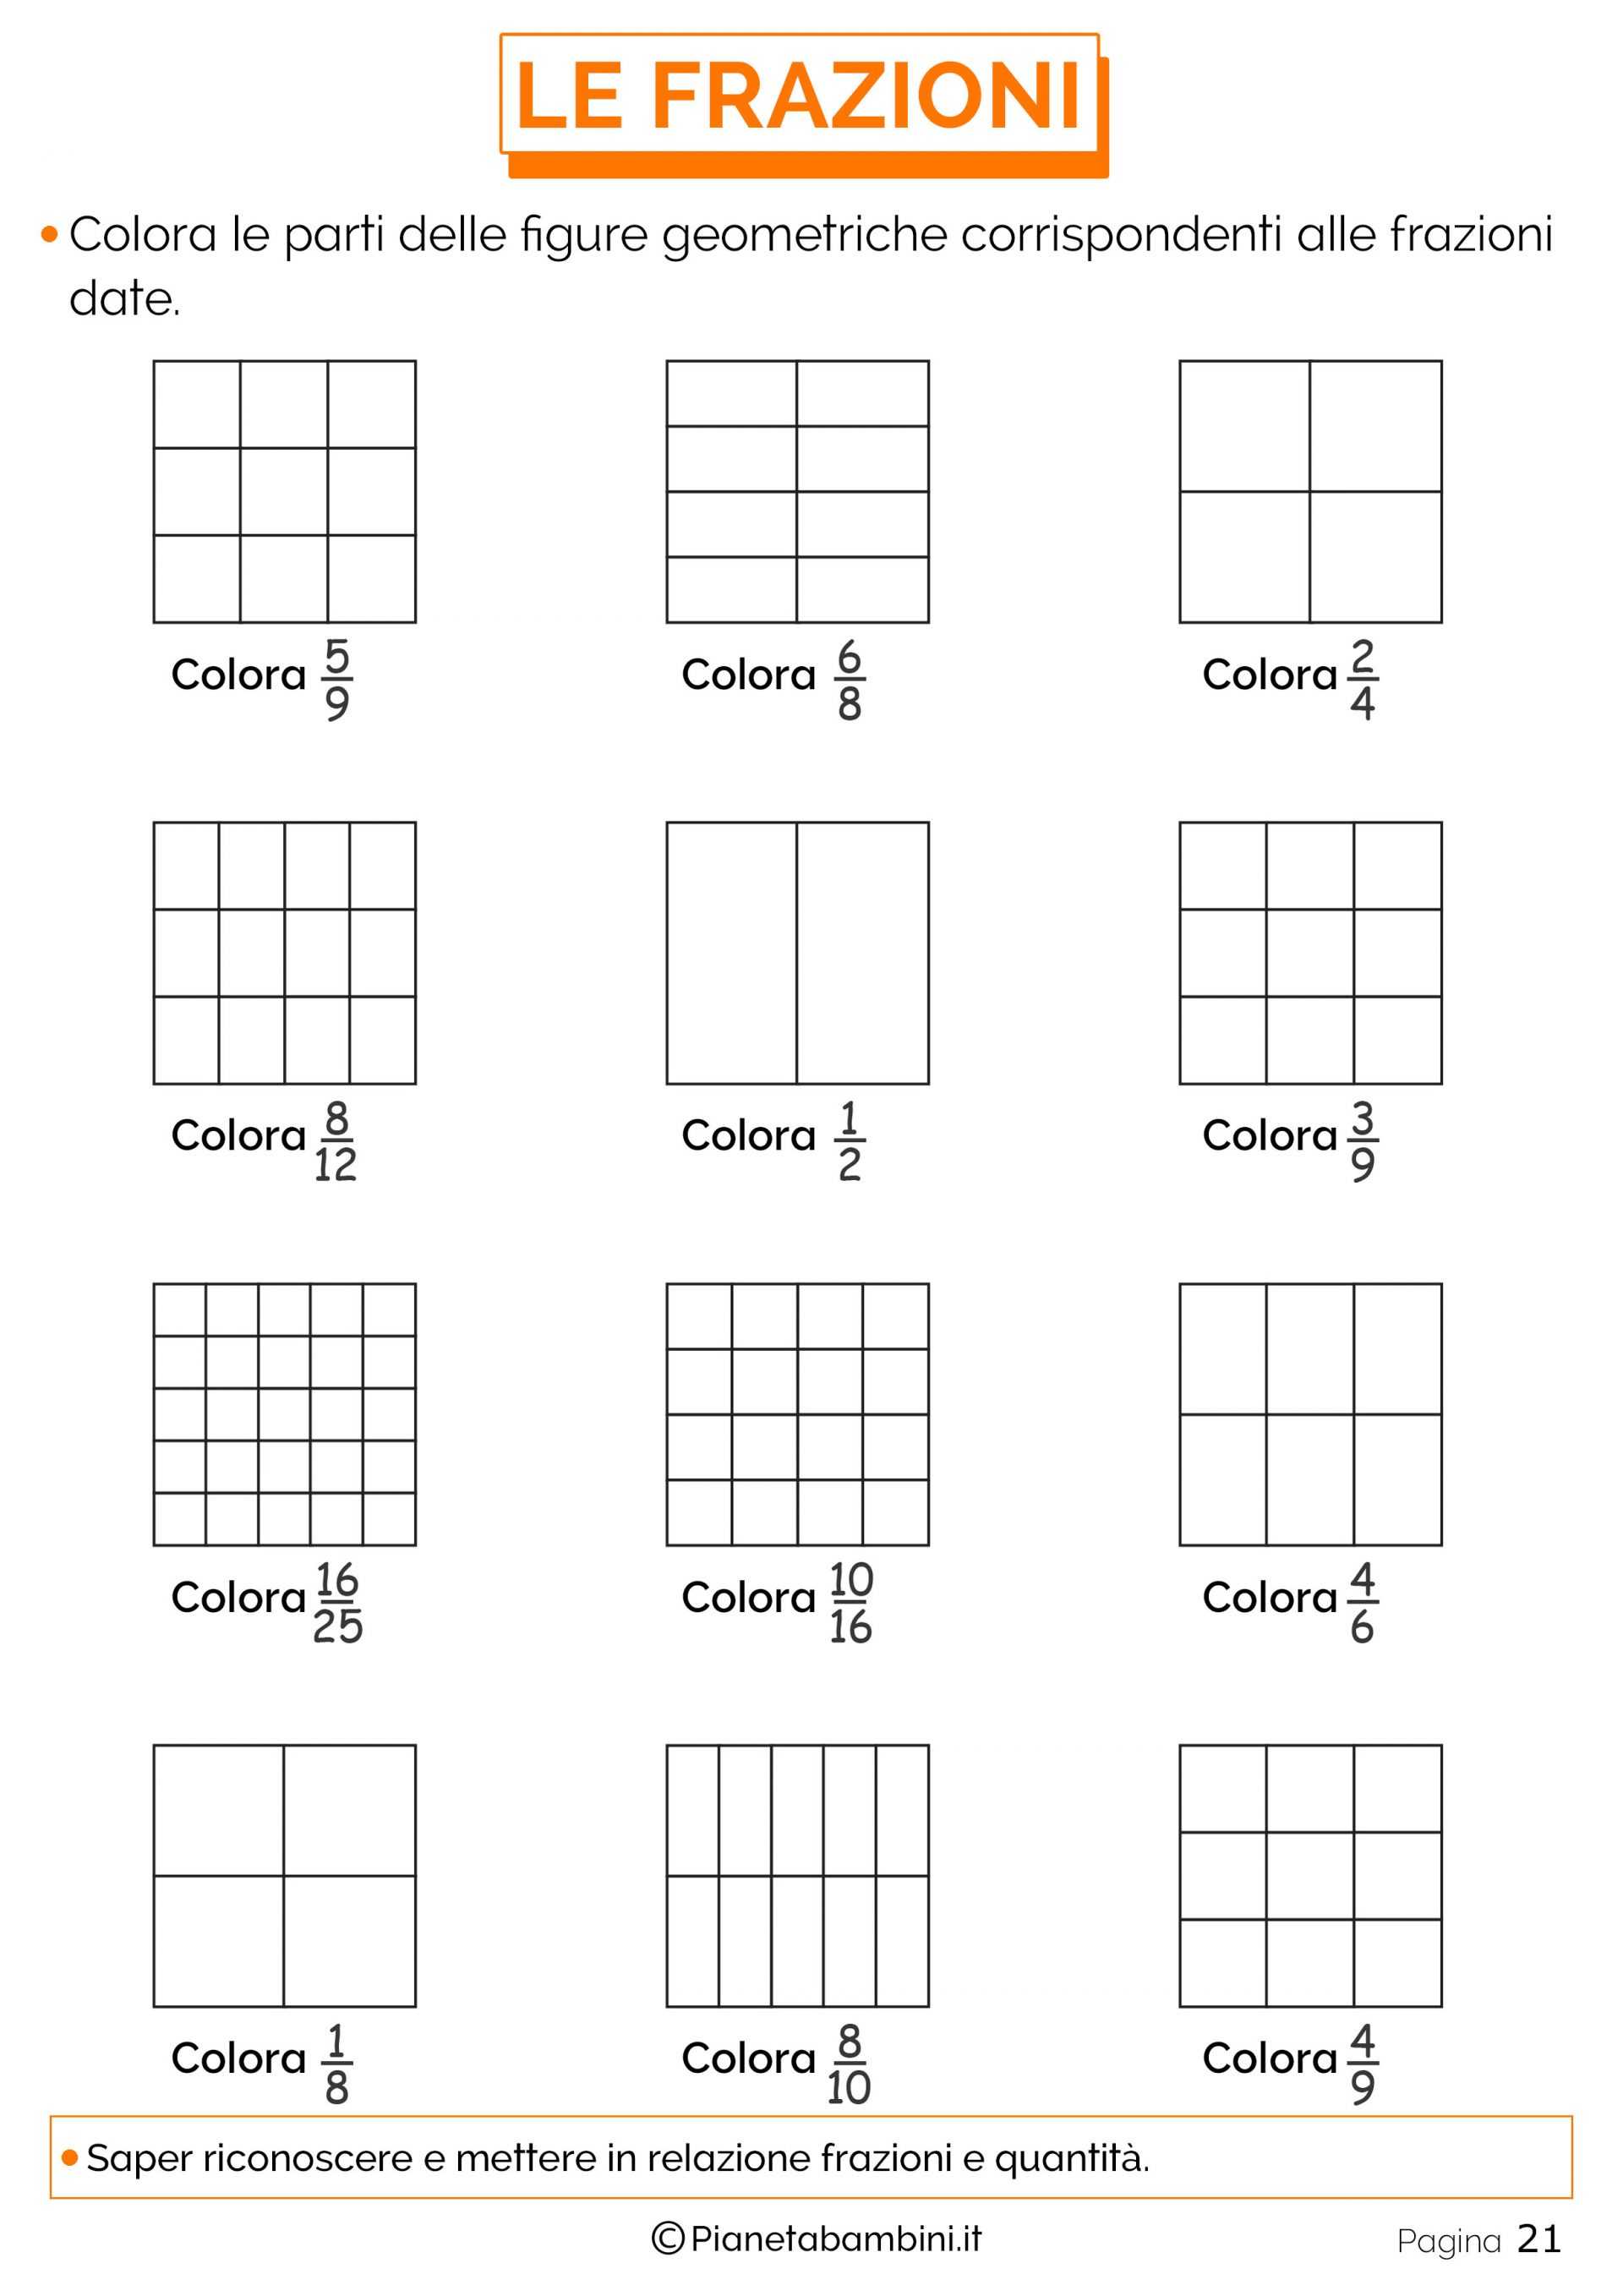 Matrices Worksheet with Answers Also Magic Squarex3 Worksheet Math Worksheets 4th Grade Square 3×3